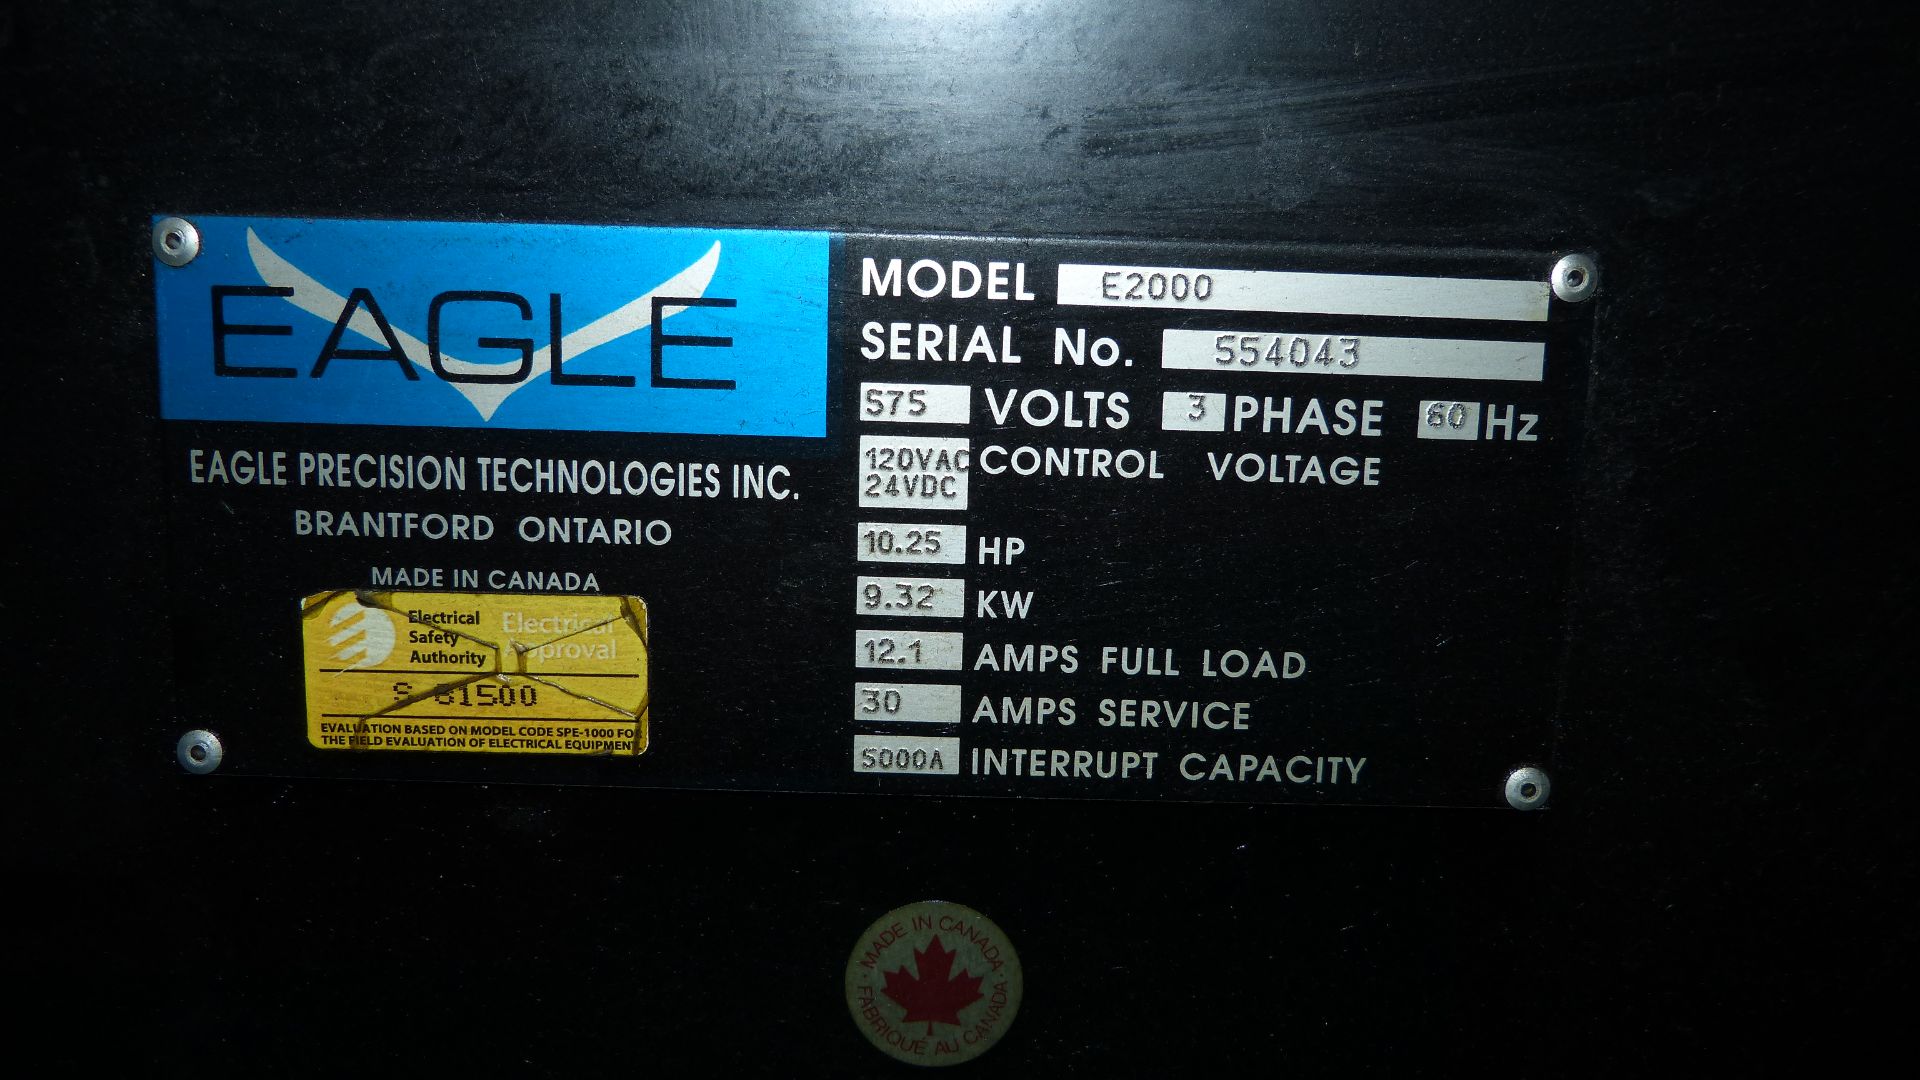 Eagle Model E 2000 Tube End Forming Machine for ID & OD Sizing, Tube Capacity 1" to 3.25", - Image 7 of 8